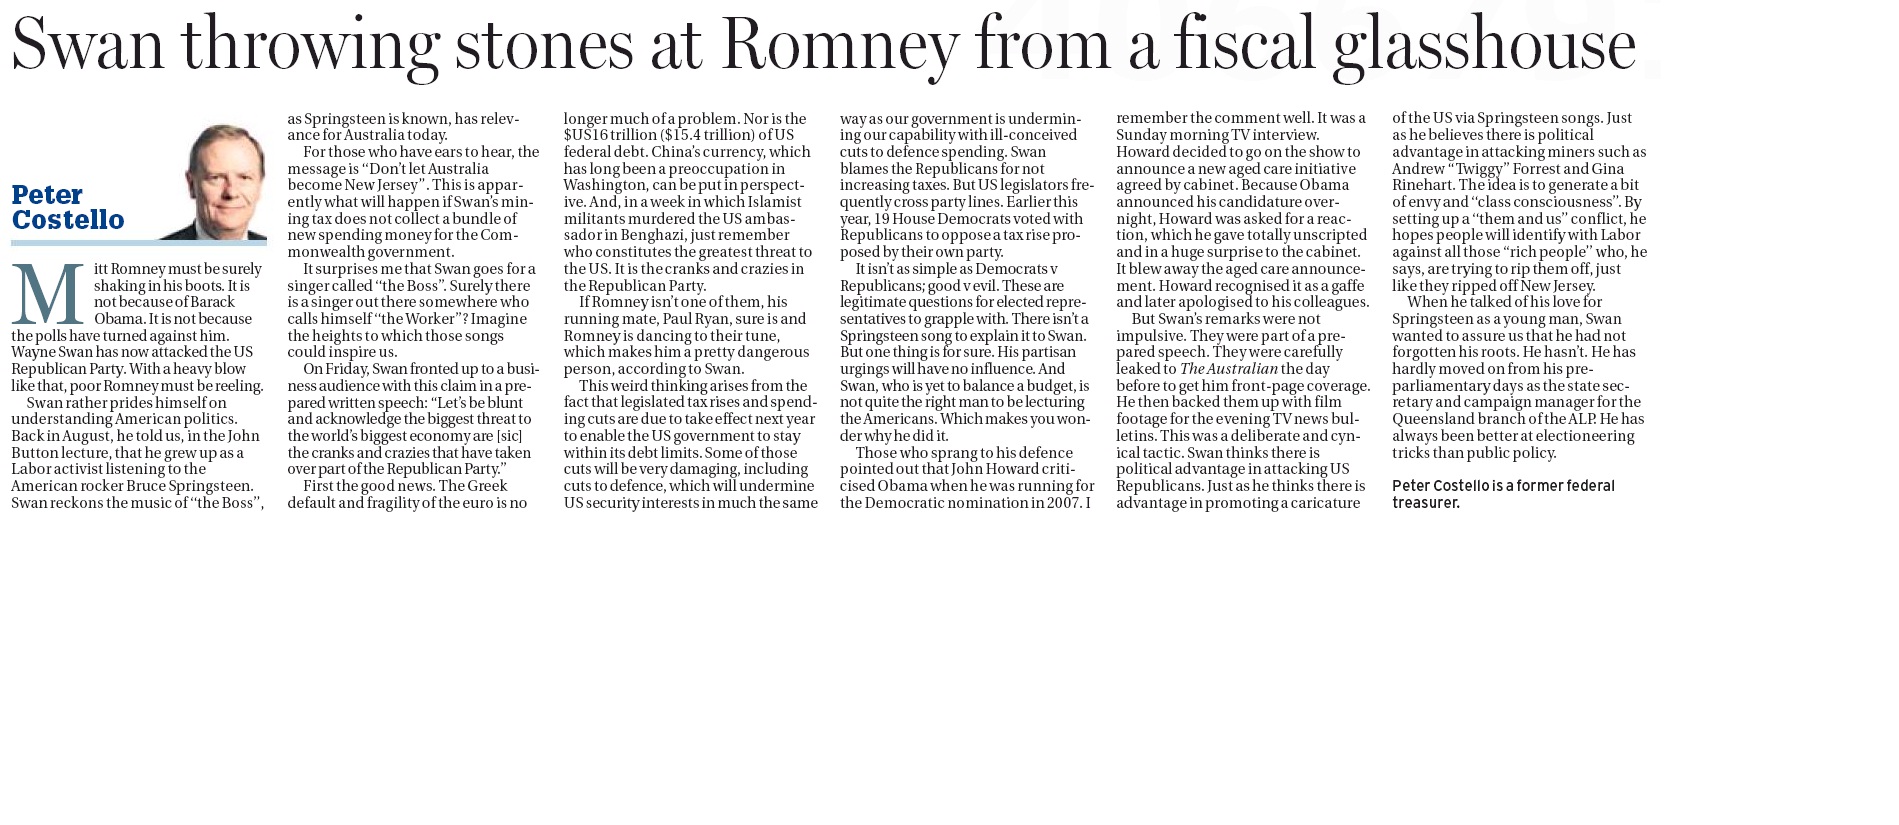 smh_-_swan_throwing_stones_at_romney_from_a_fiscal_glasshouse_-_26_september_2012jpg